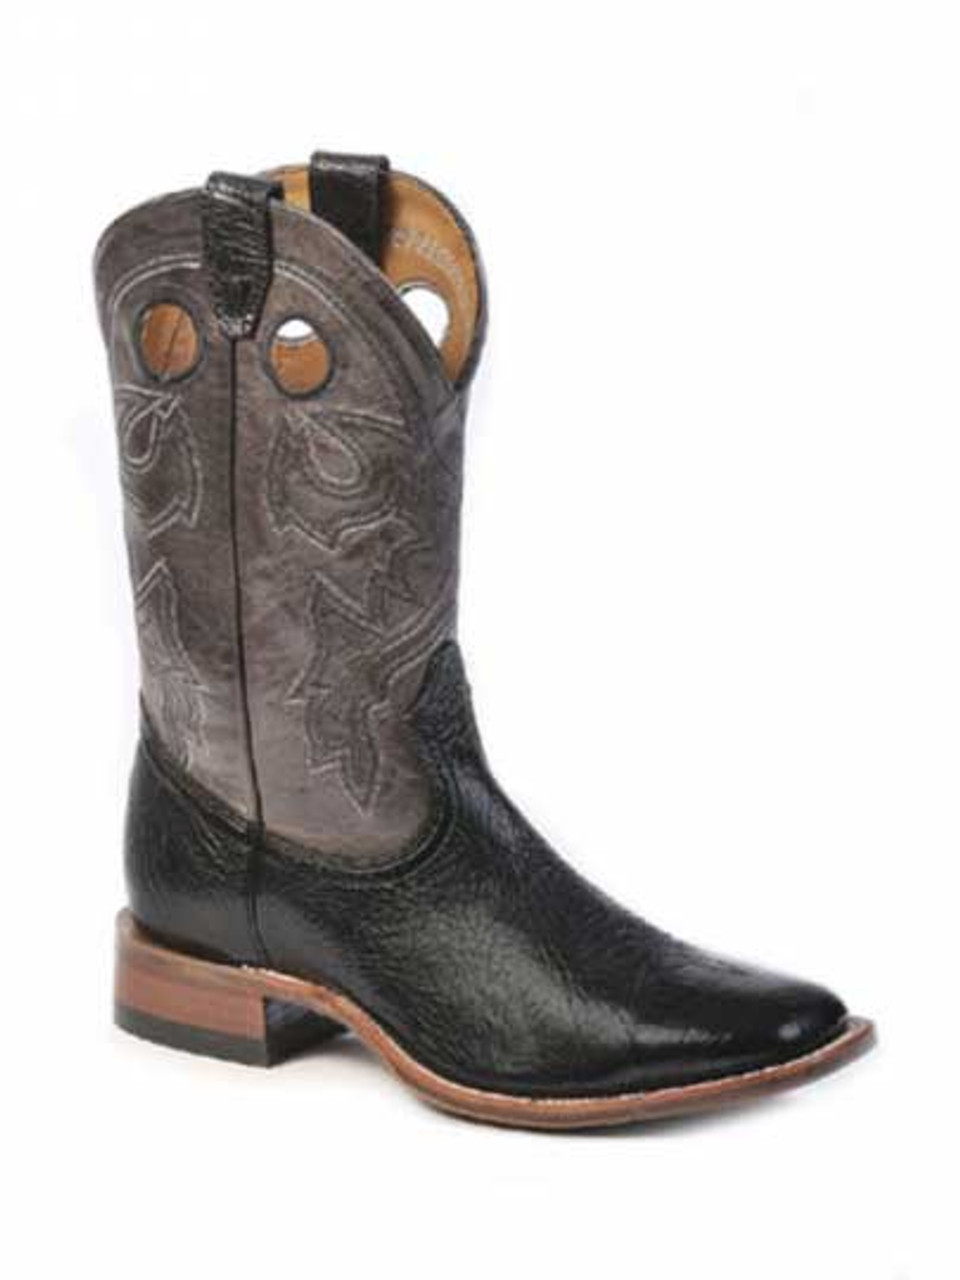 wide square toe cowboy boots